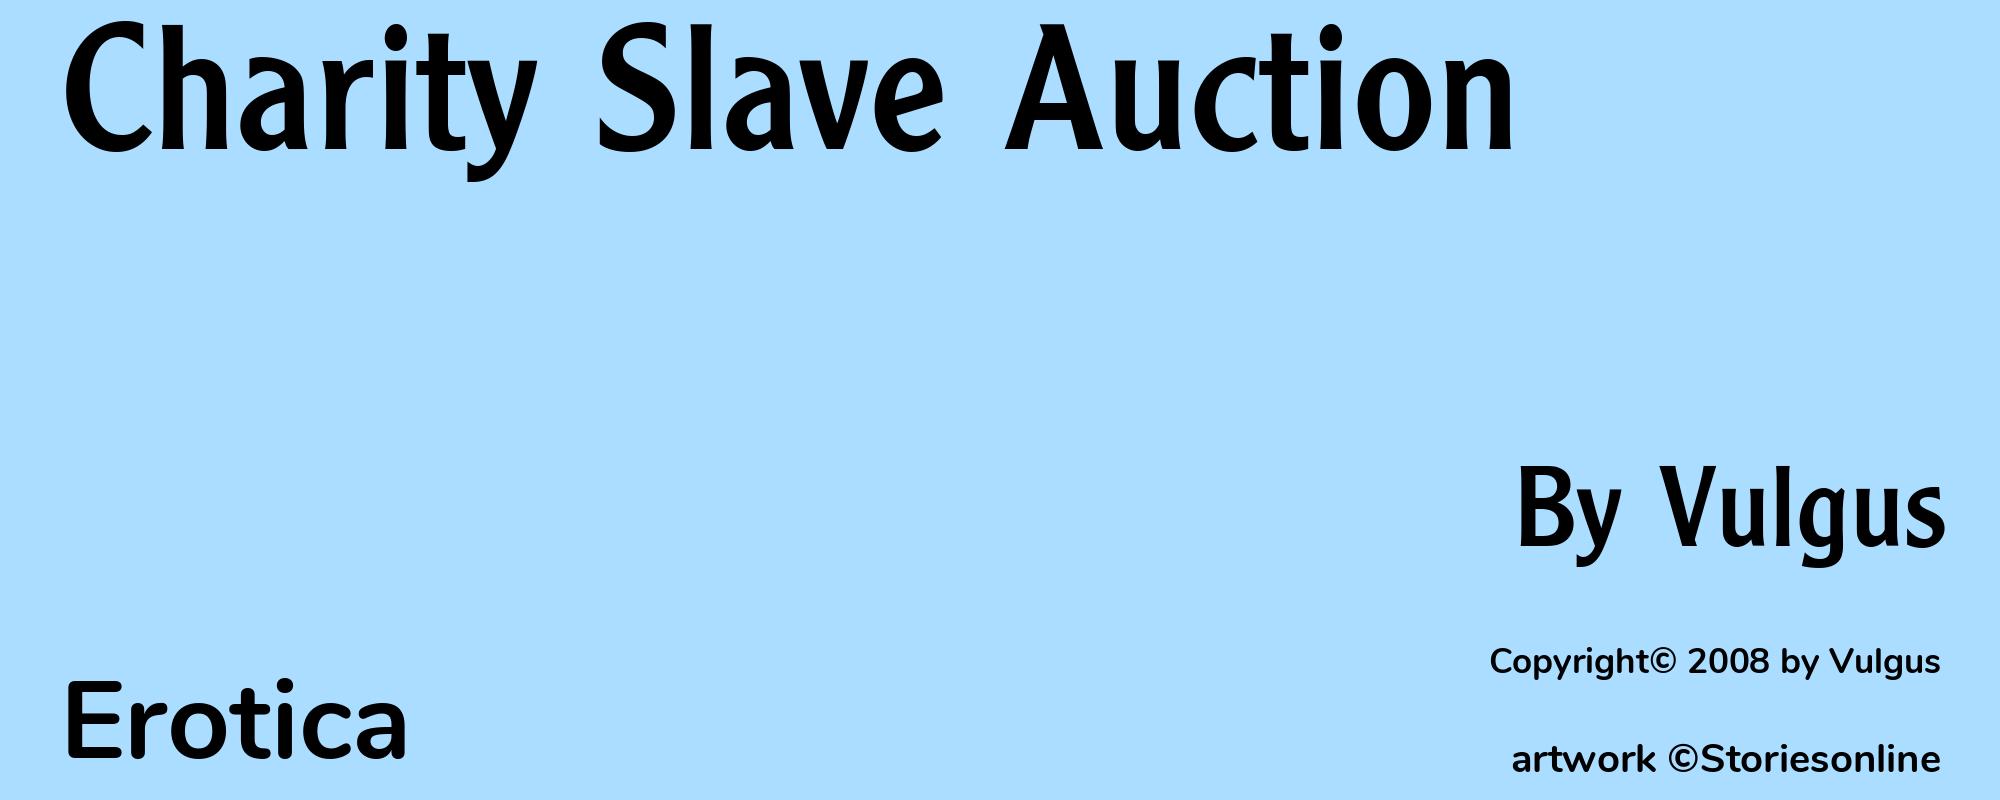 Charity Slave Auction - Cover